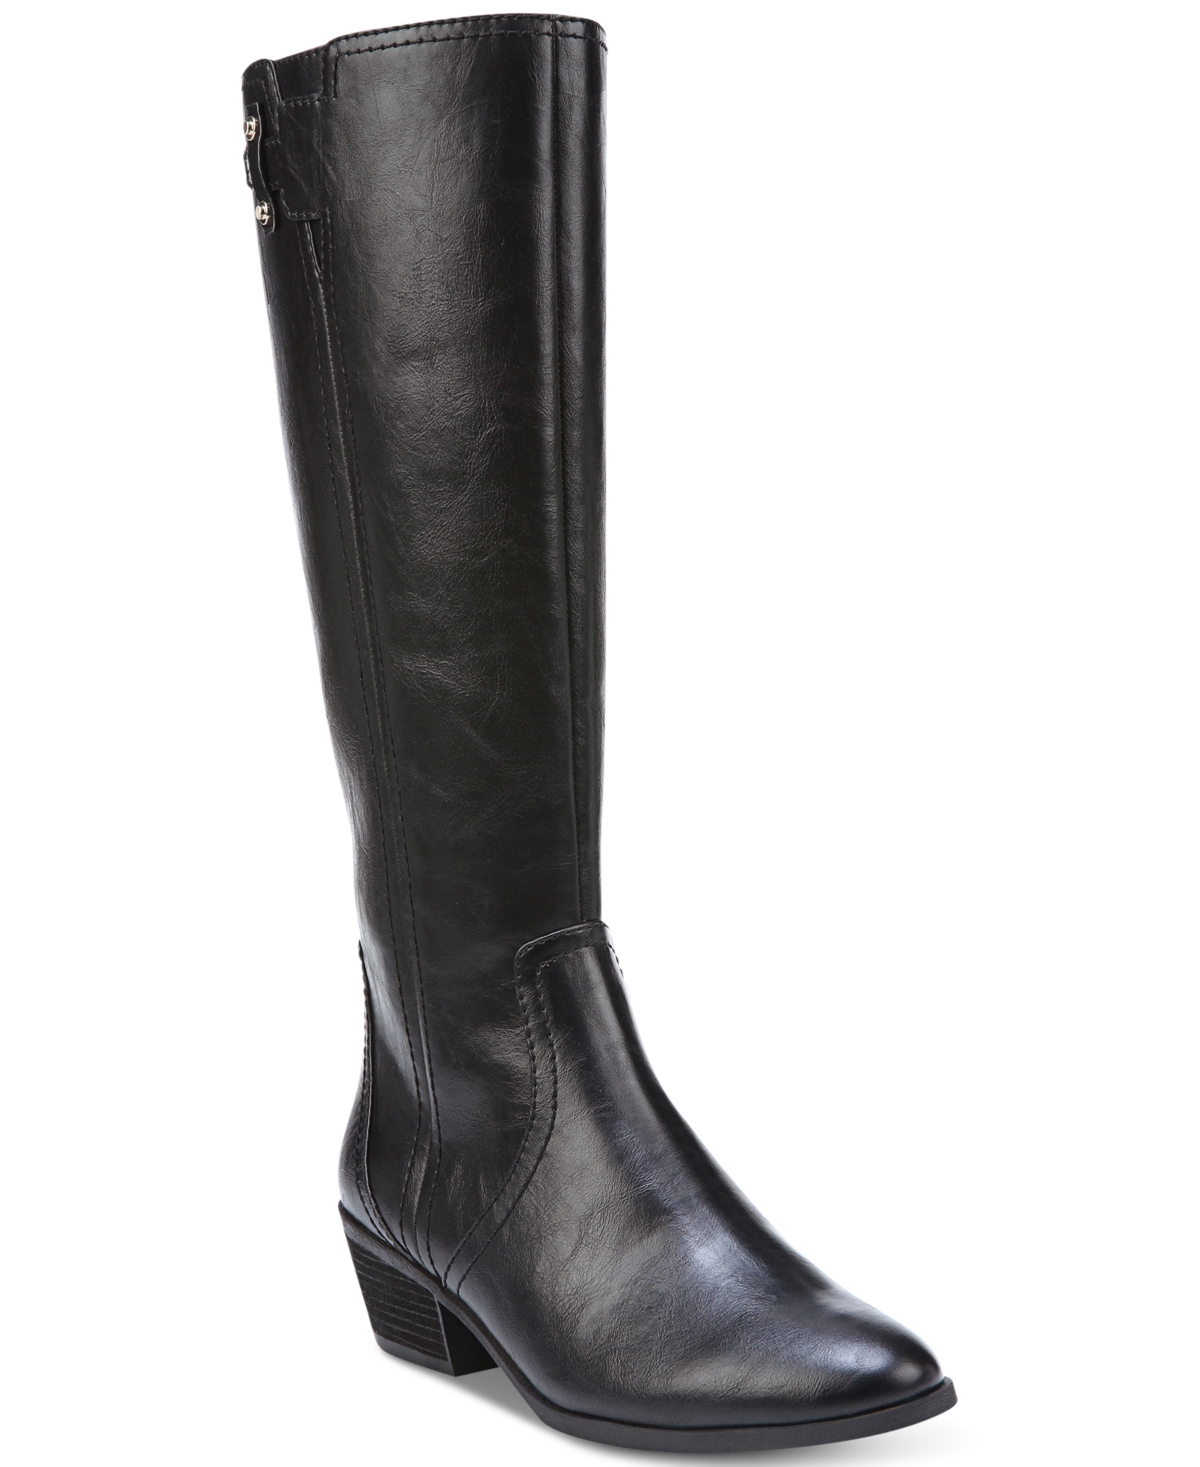 Women's Brilliance Wide-Calf Tall Boots - Whiskey Faux Leather